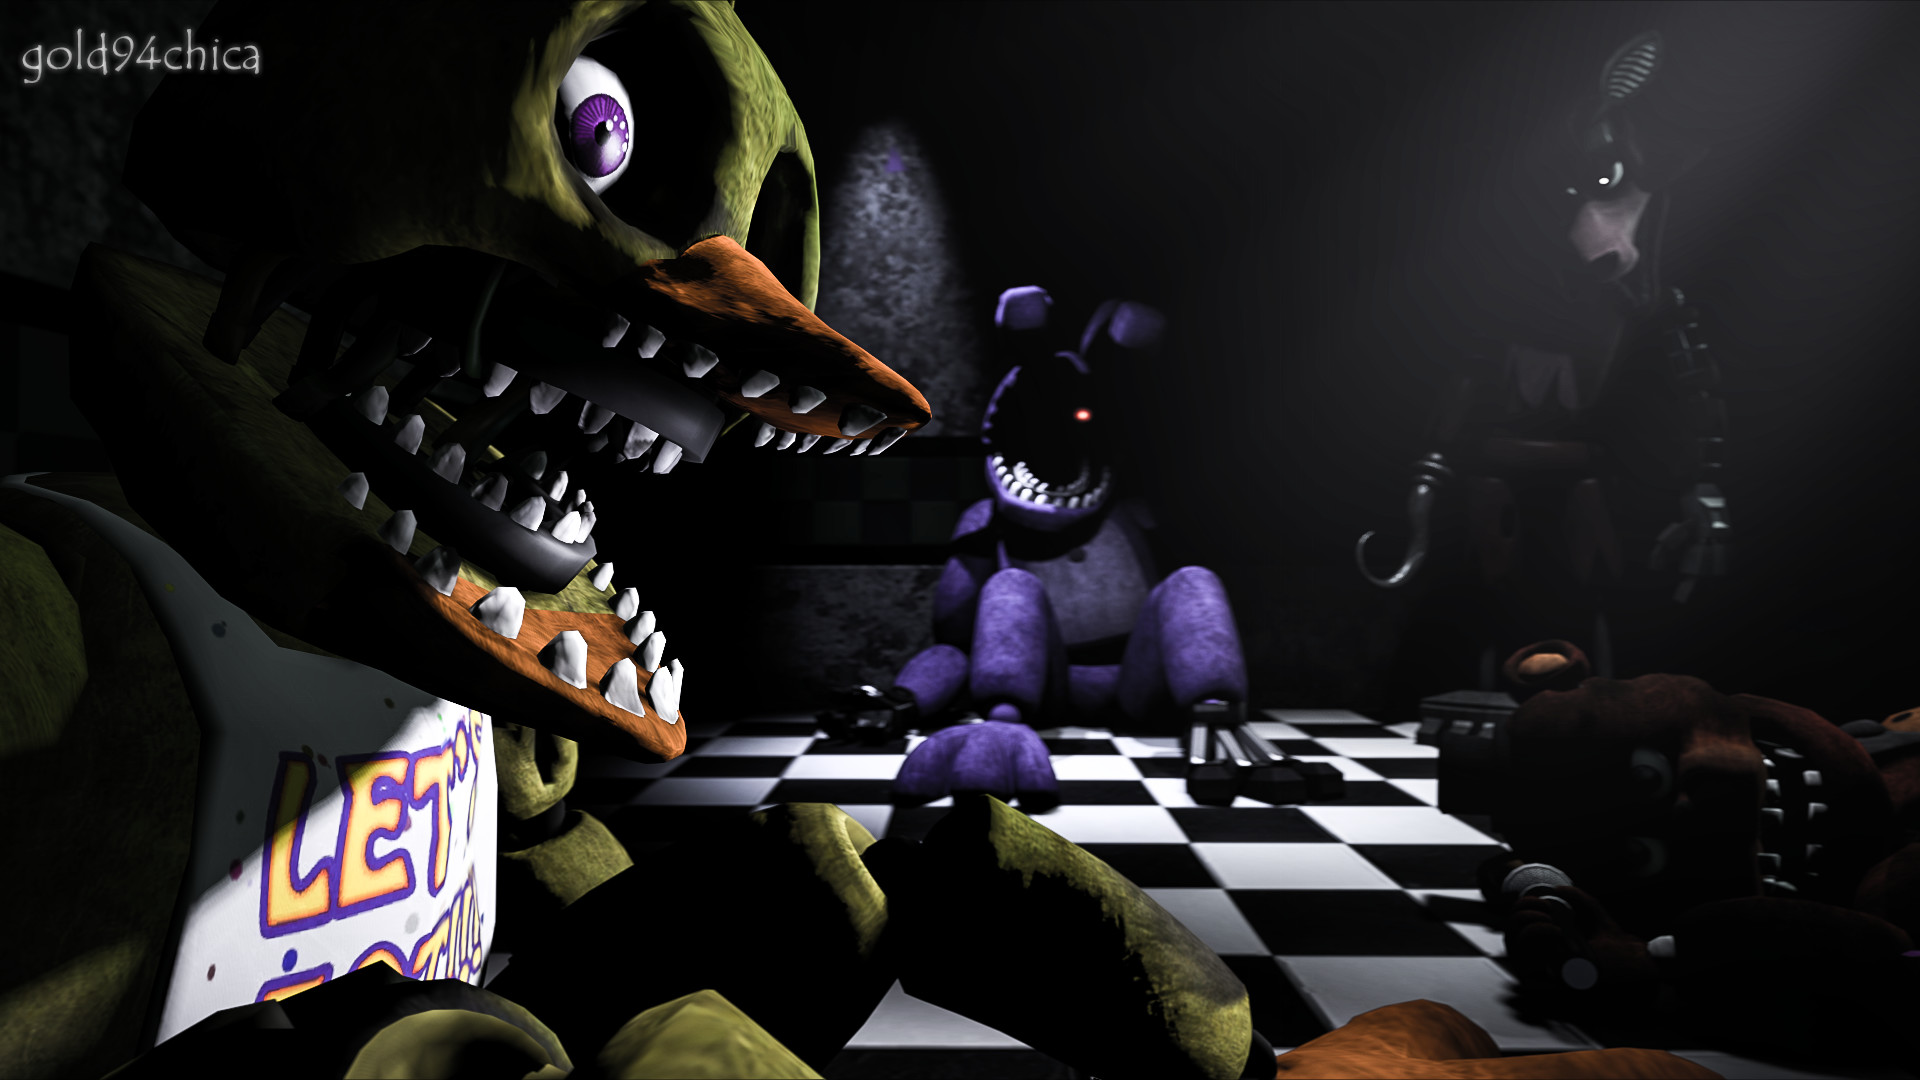 1920x1080 for our turn SFM FNAF2 Wallpaper by gold94chica 